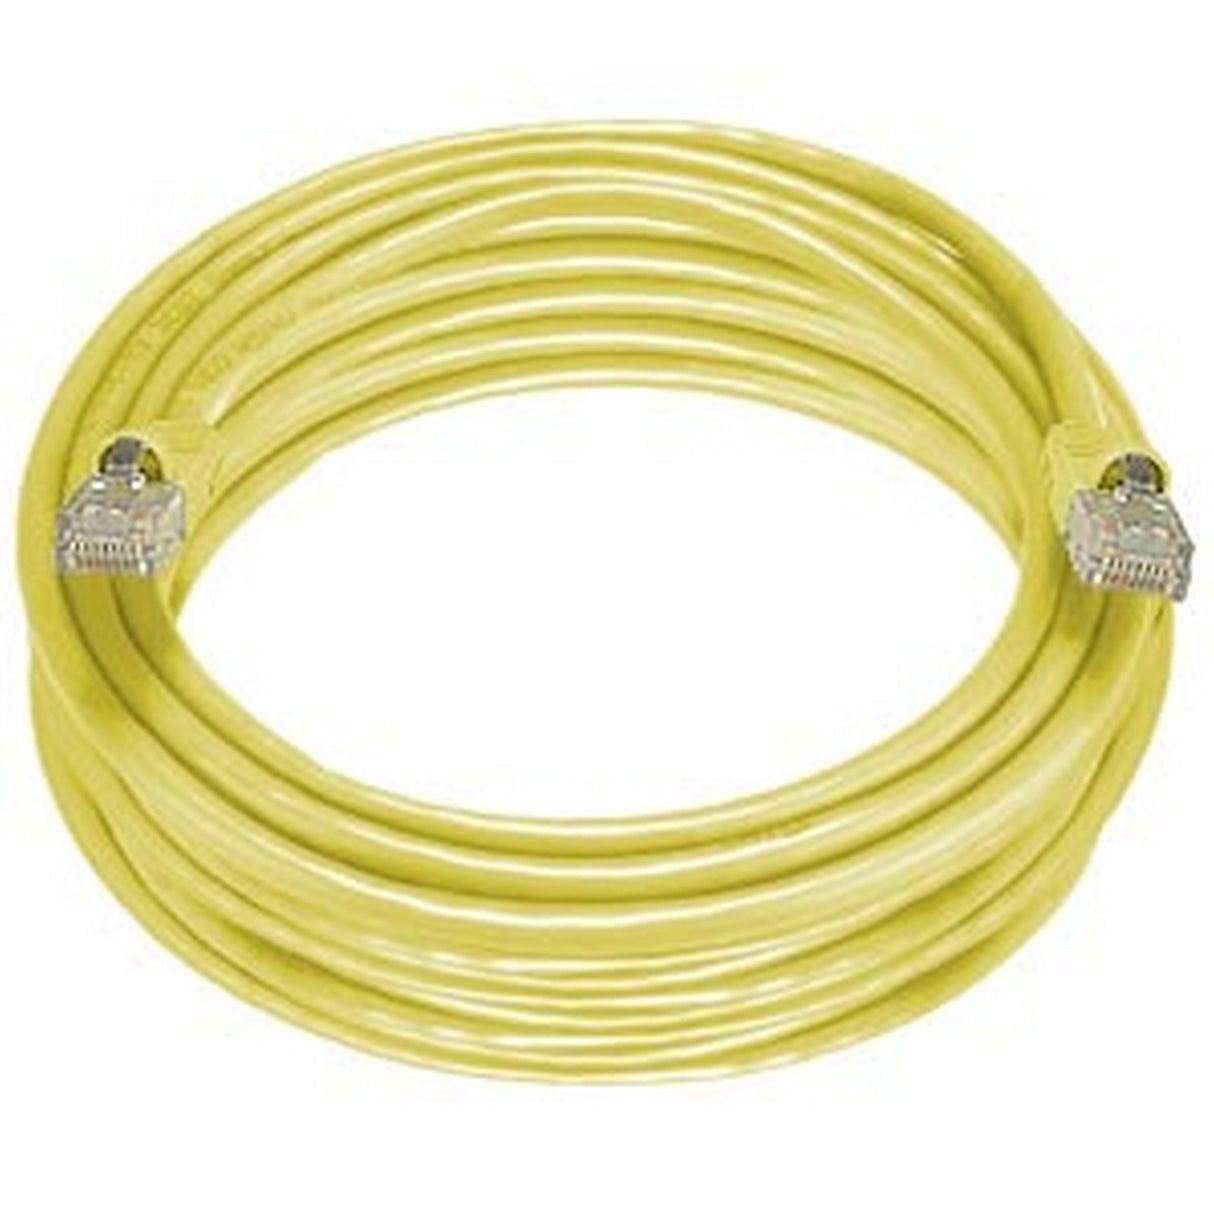 NTI CAT5E-50-YELLOW CAT5e Stranded Unshielded Cable, Yellow, 50-Foot